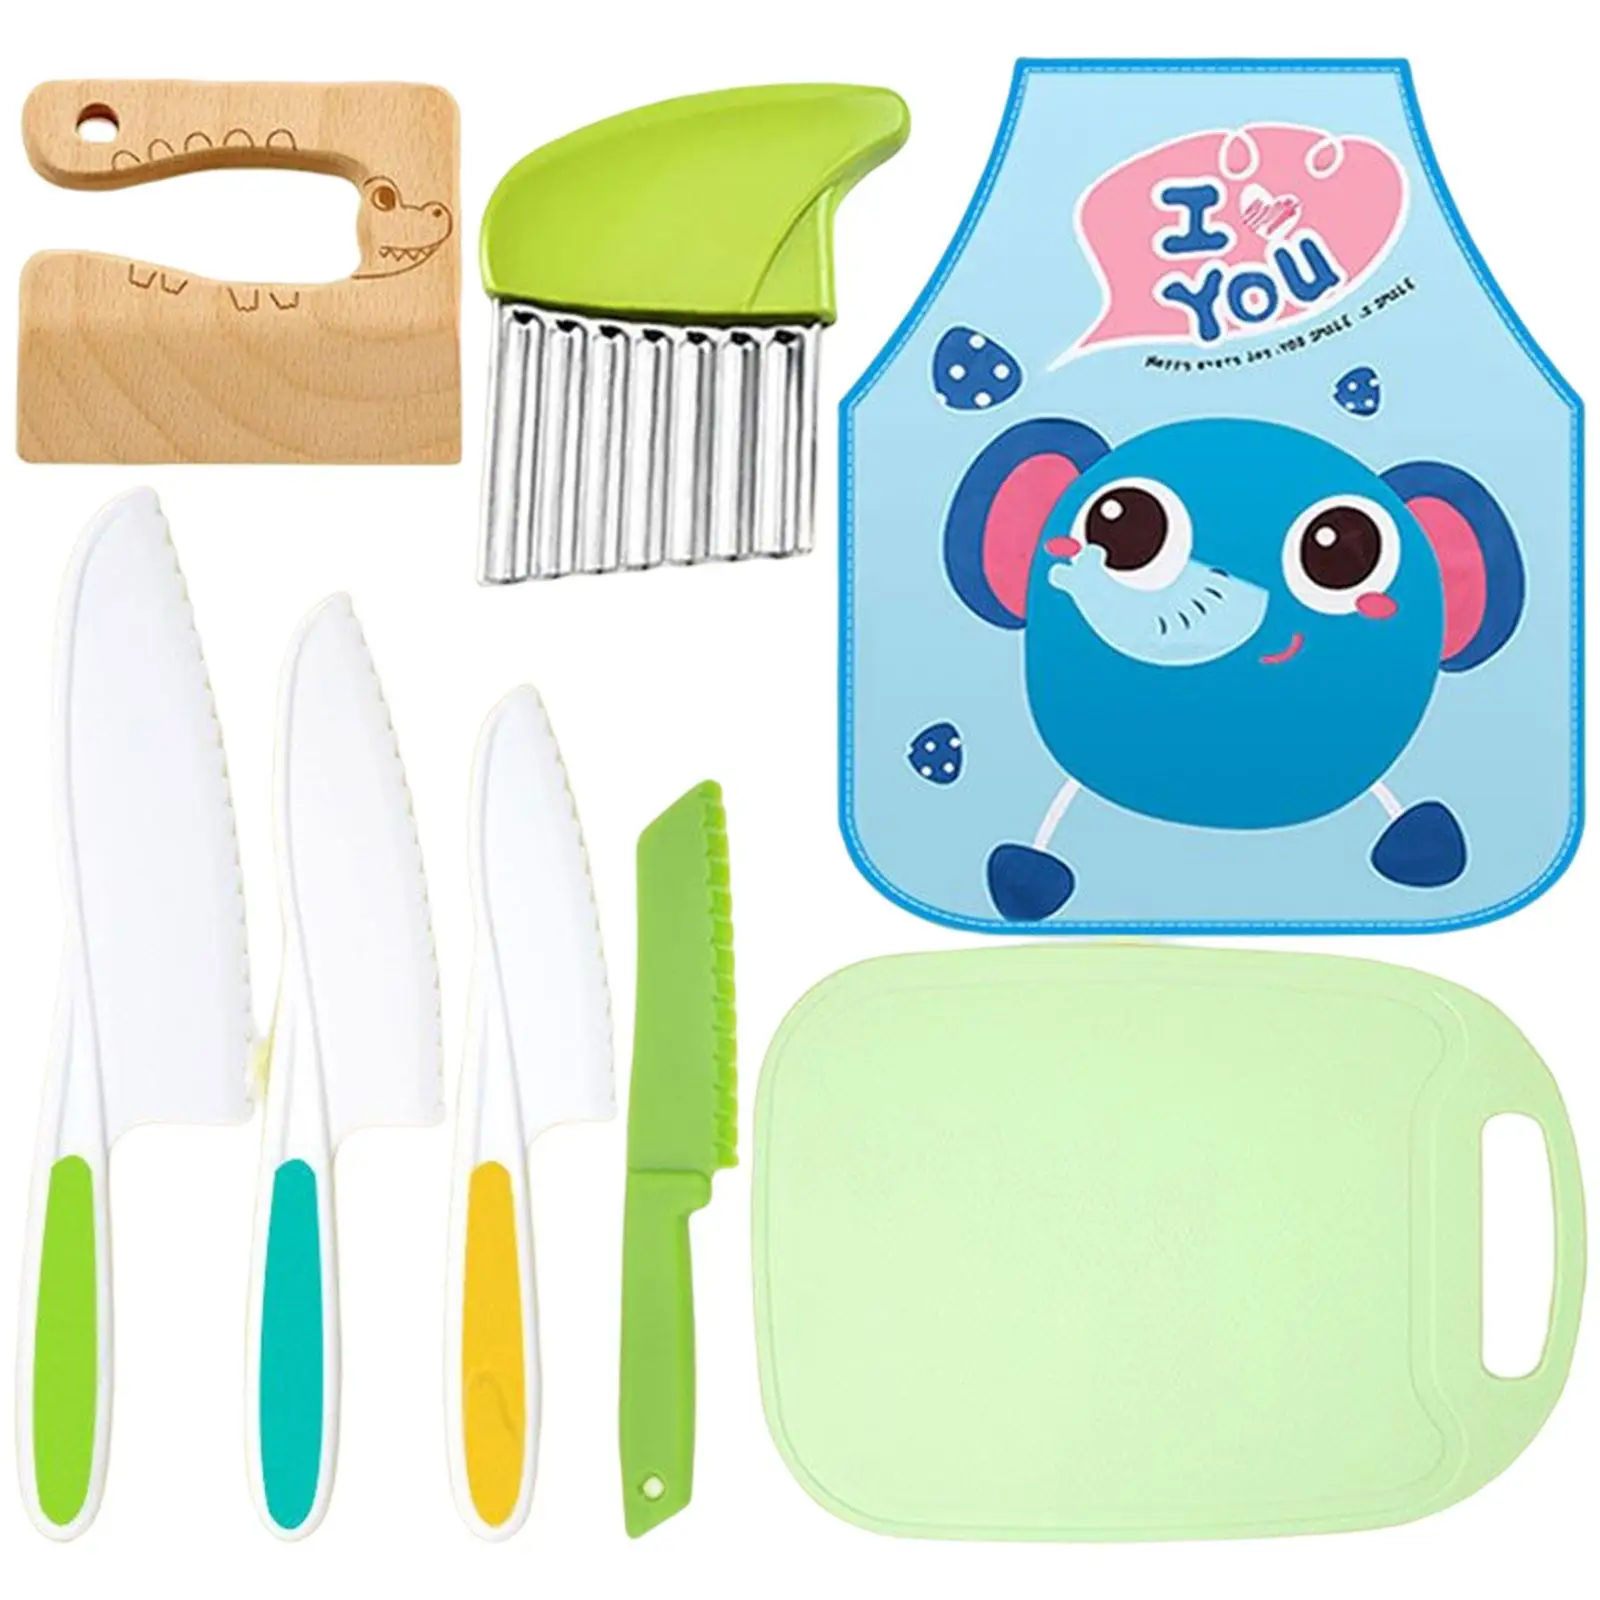 8x Children Kitchen Cookware Playset Learn Skills Children Apron and Cutting Board Cooking Toys for Kids Baby Holiday Gifts